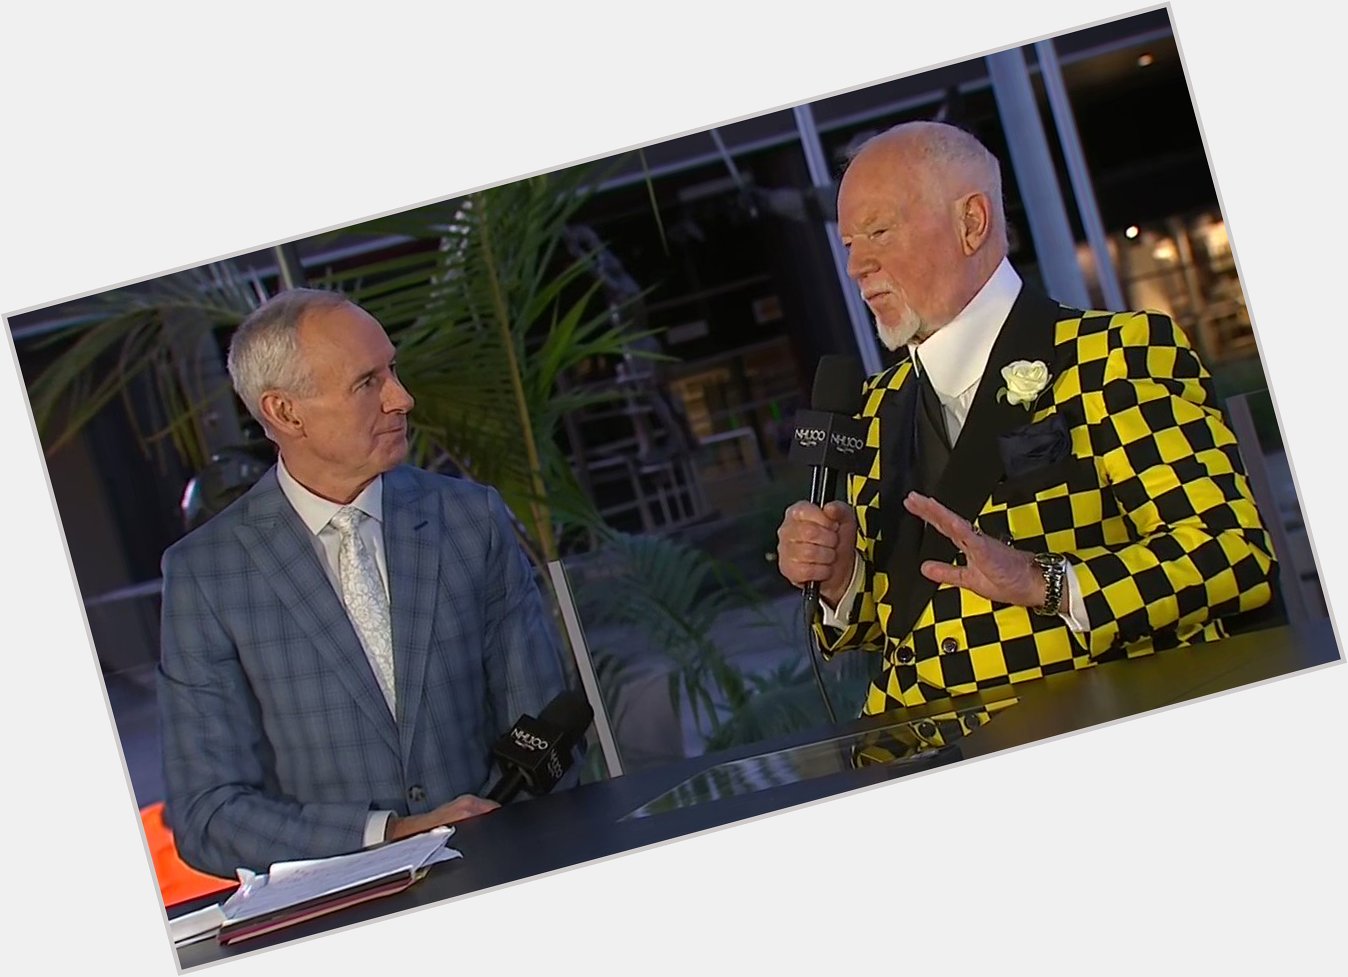 Happy birthday Don Cherry! Hey Grapes, who the greatest hockey player that s ever been borned?

